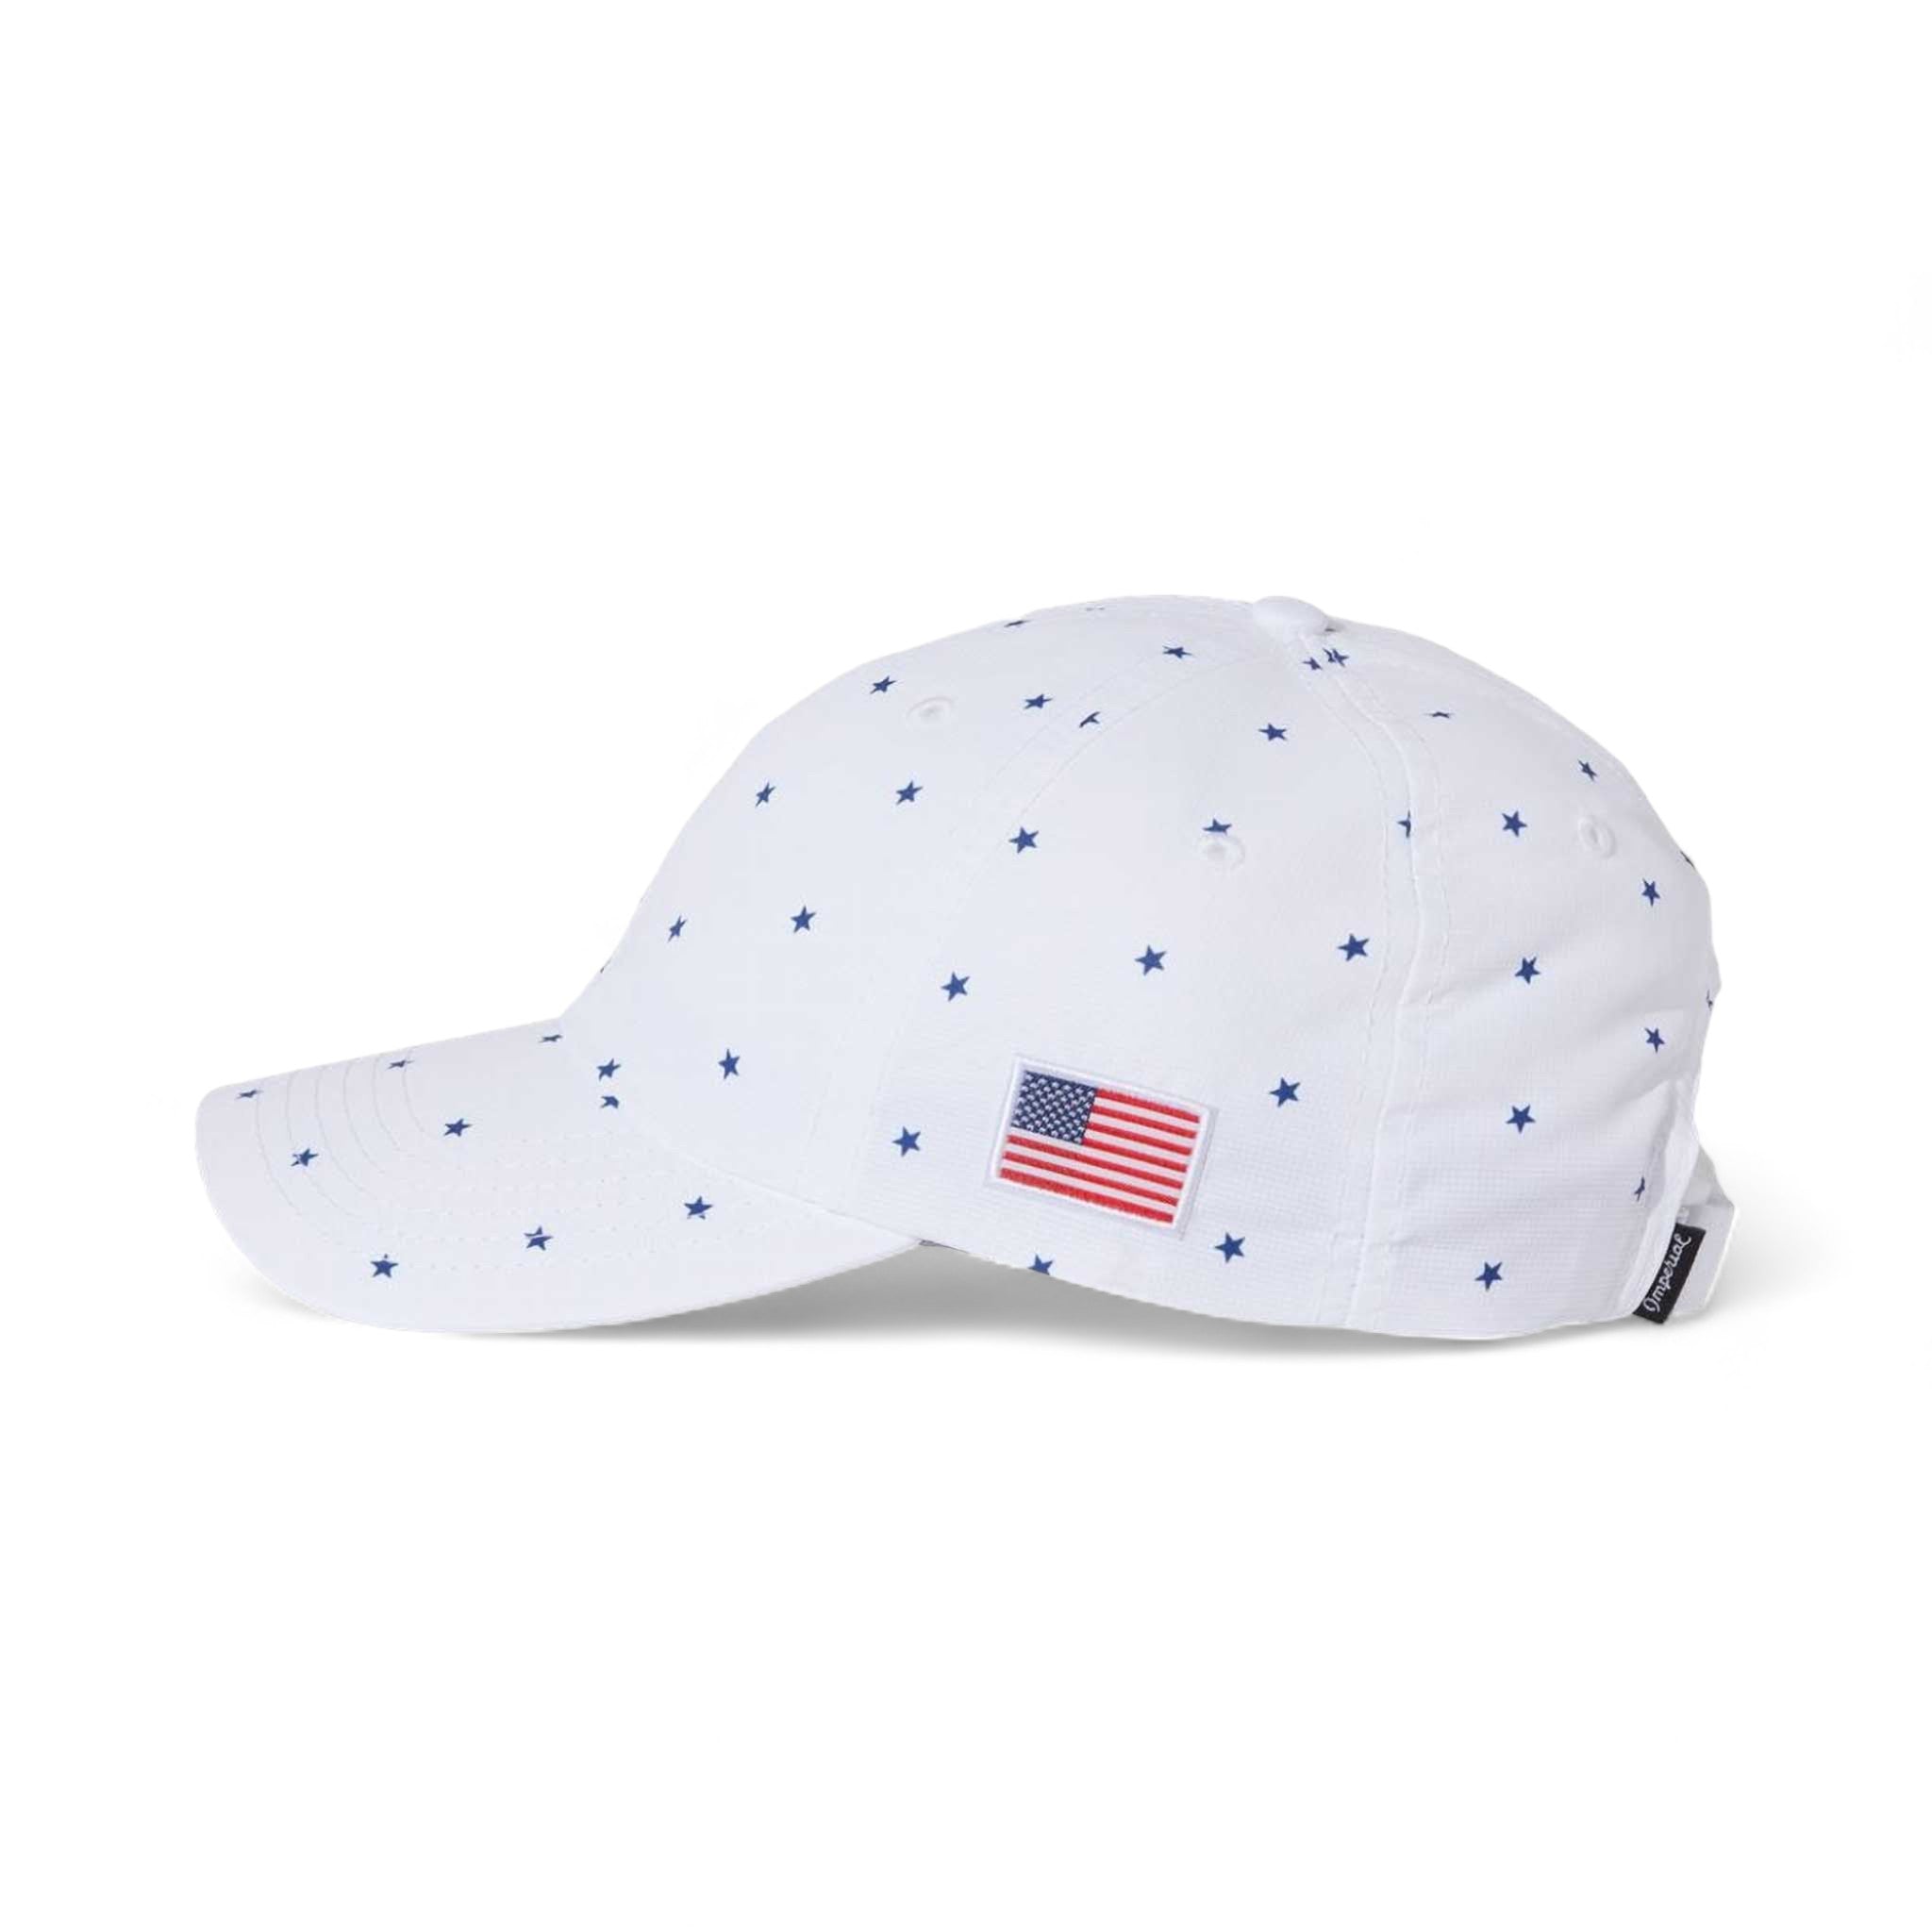 Side view of Imperial X210R custom hat in white stars